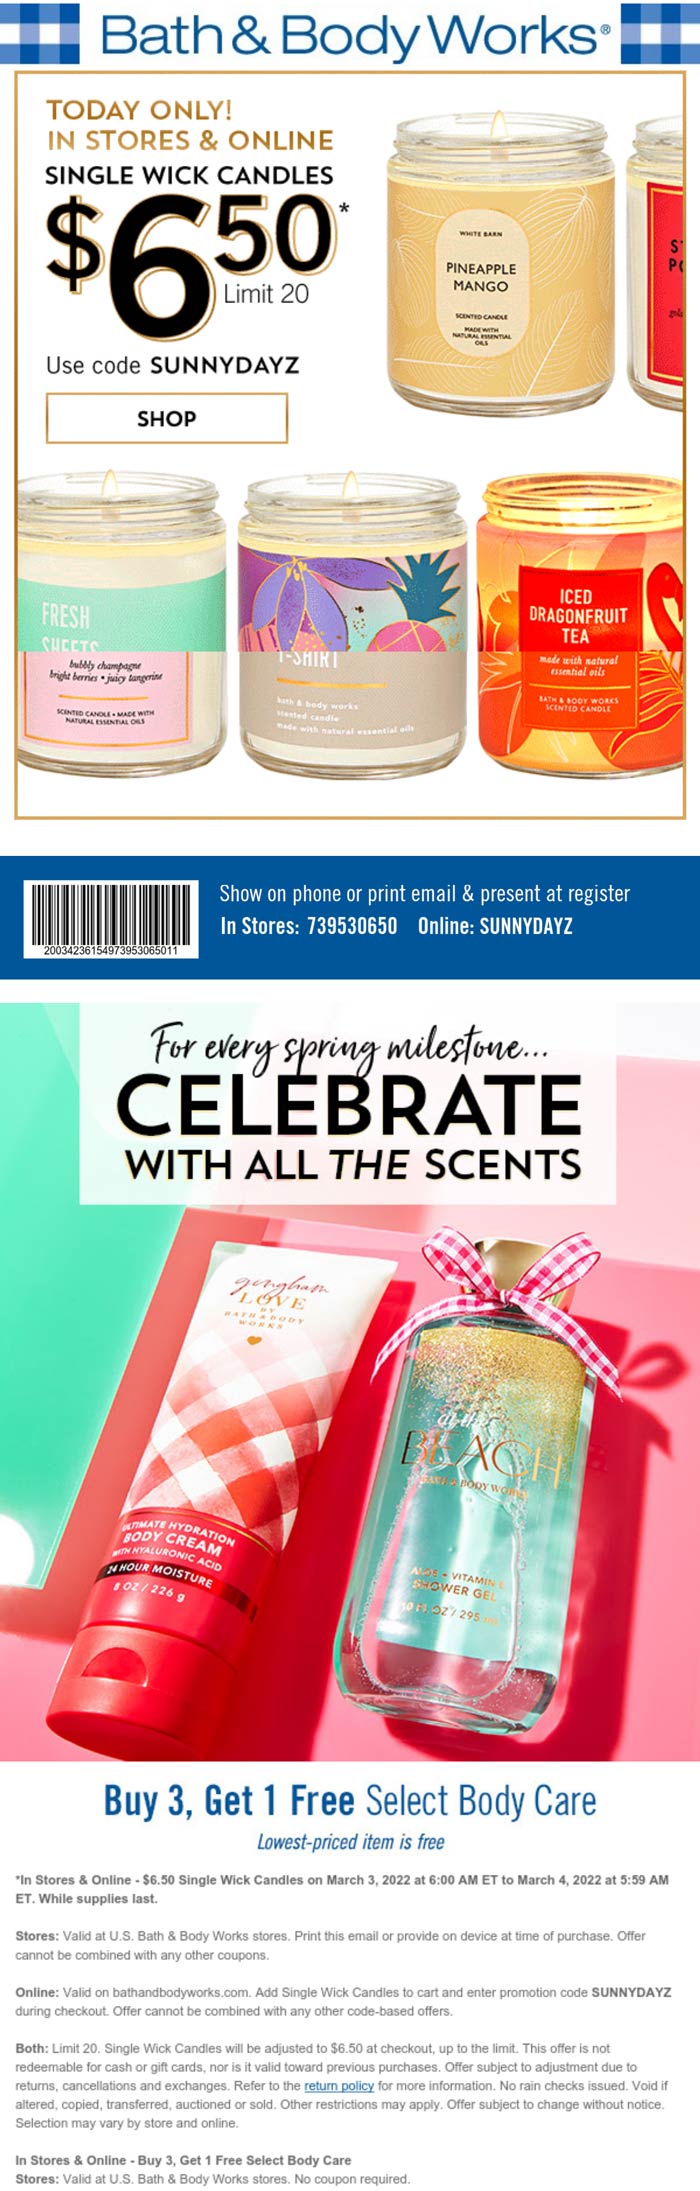 Bath & Body Works stores Coupon  4th body care free + $6.50 candles today at Bath & Body Works, or online via promo code SUNNYDAYZ #bathbodyworks 